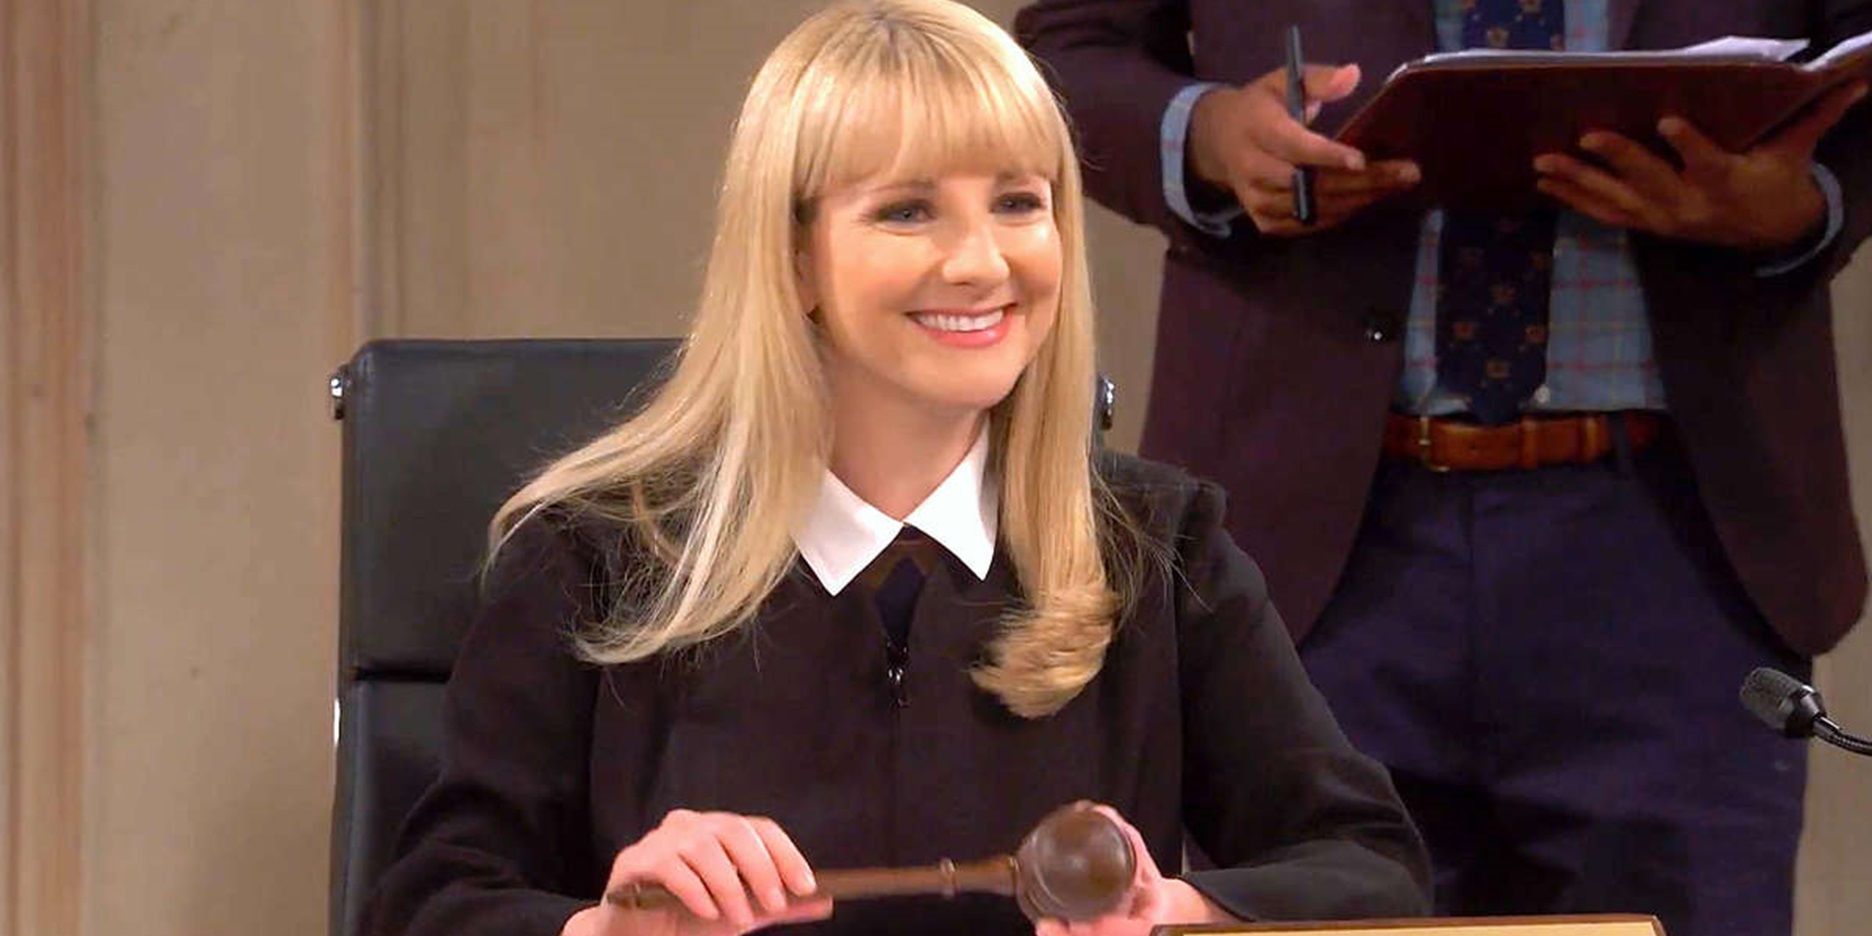 Abby smiling with gavel in her hand in Night Court